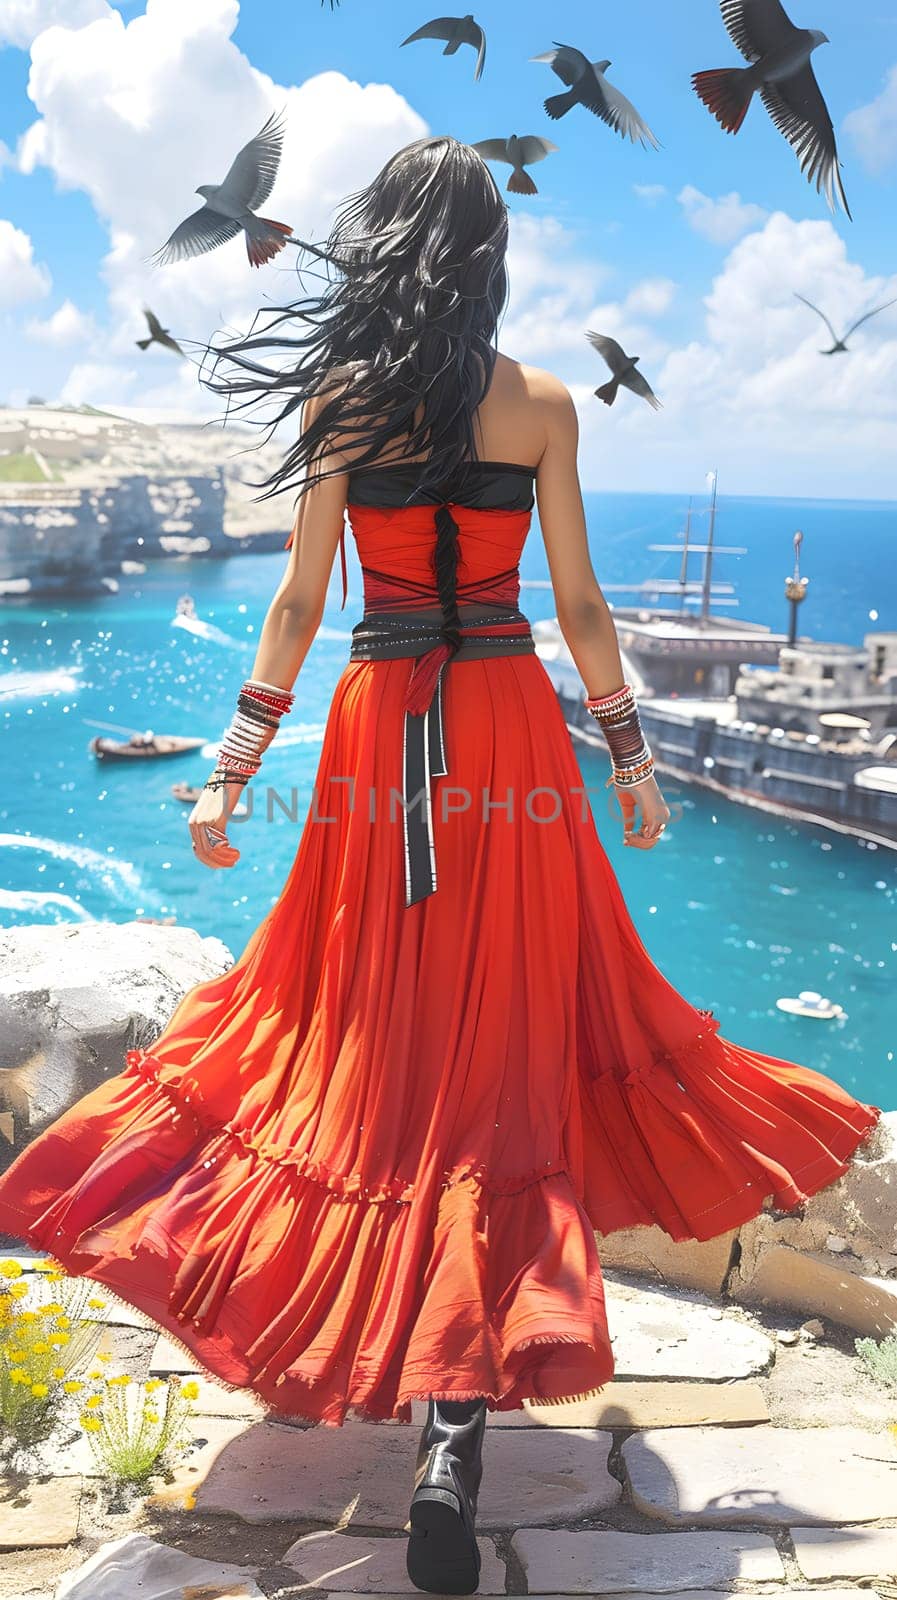 A woman in a red dress is standing by the azure water, beneath the cloudy sky, showcasing a beautiful contrast of colors against her onepiece garment